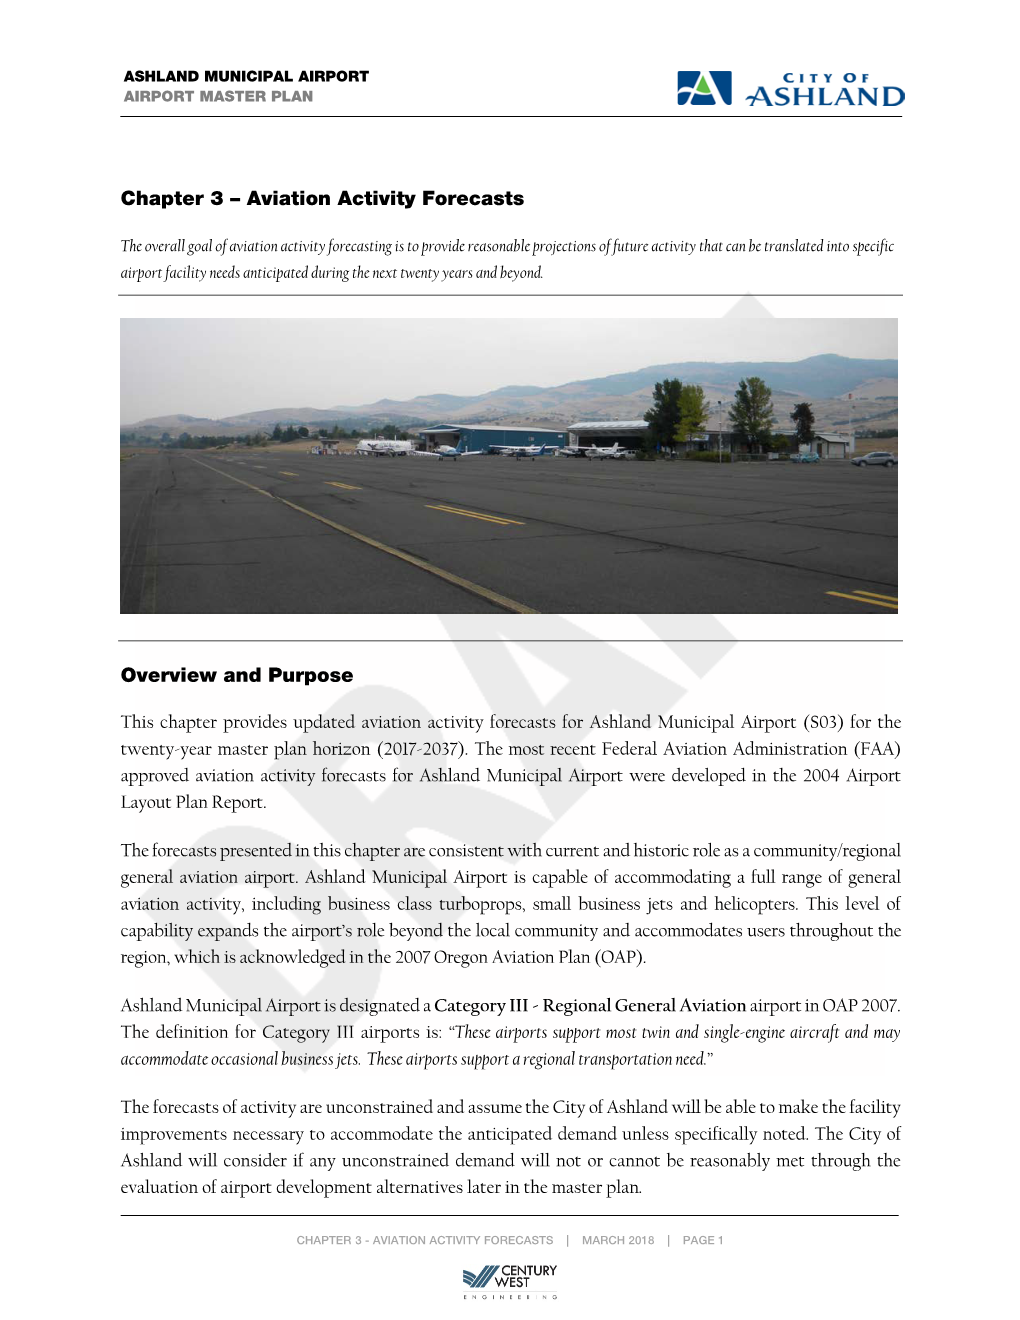 Aviation Activity Forecasts Overview and Purpose